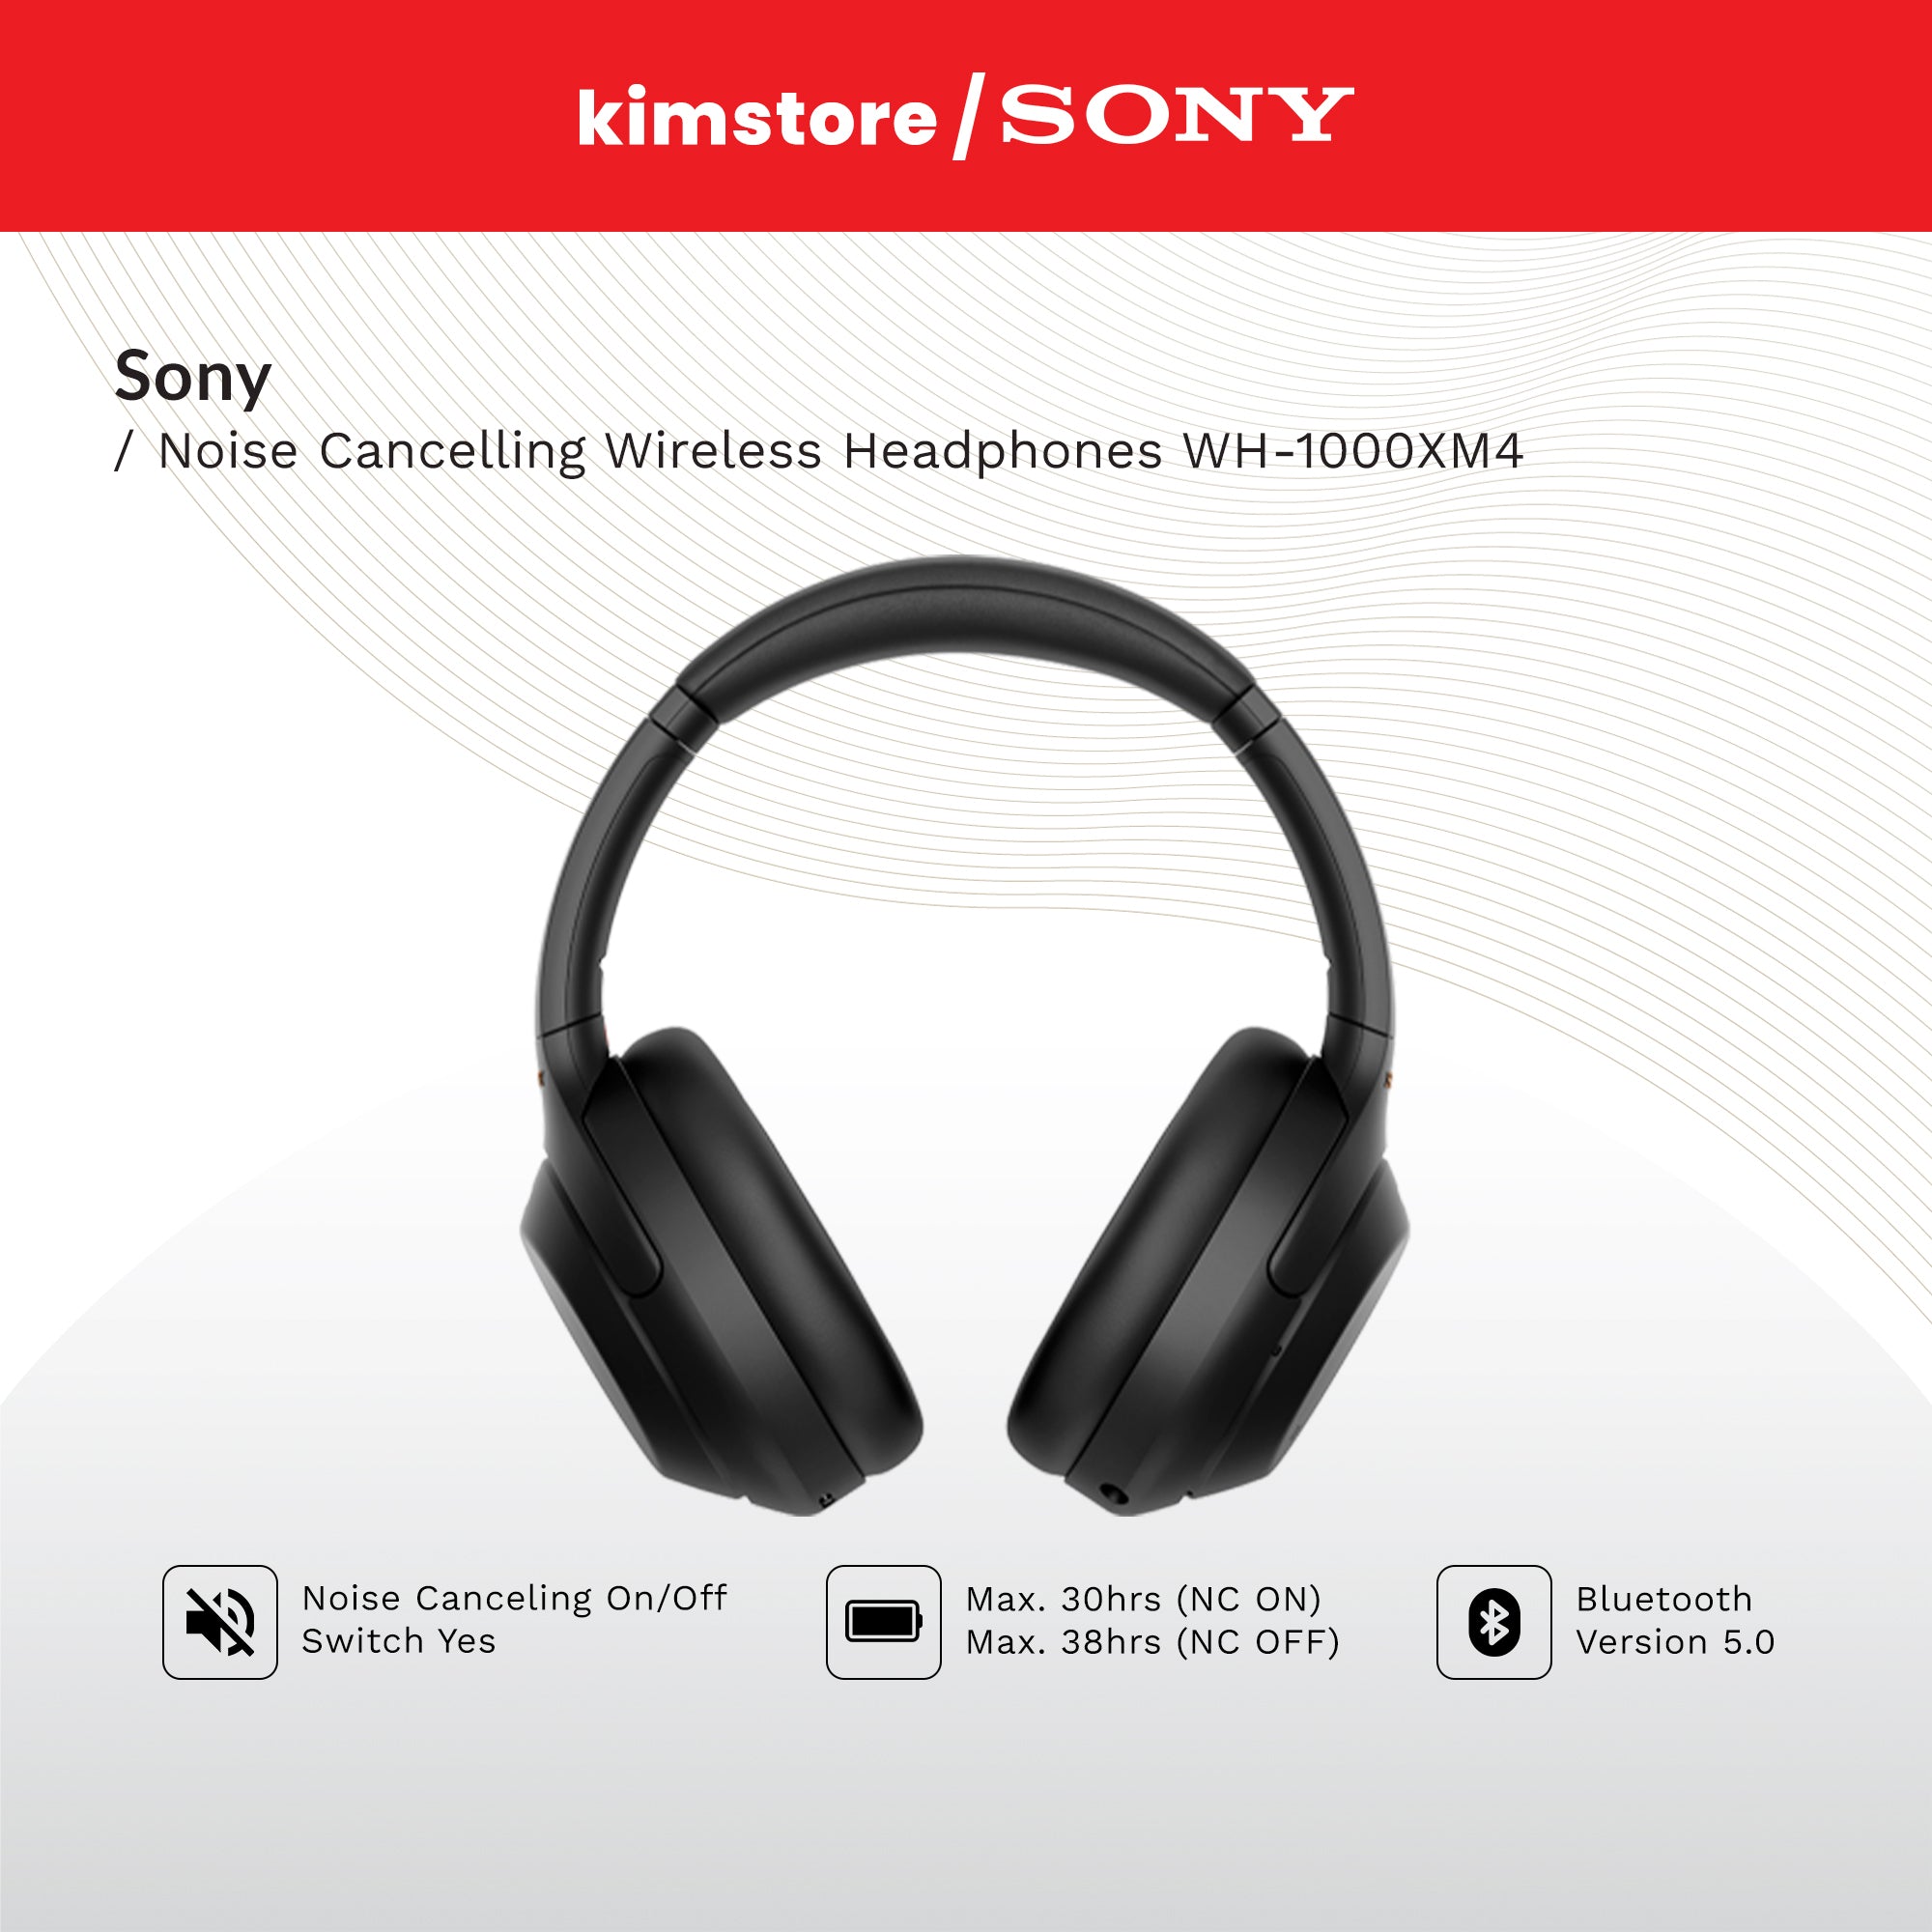 Sony WH-1000XM4 Wireless Noise-Cancelling Over-the-Ear Headphones Midnight  Blue*